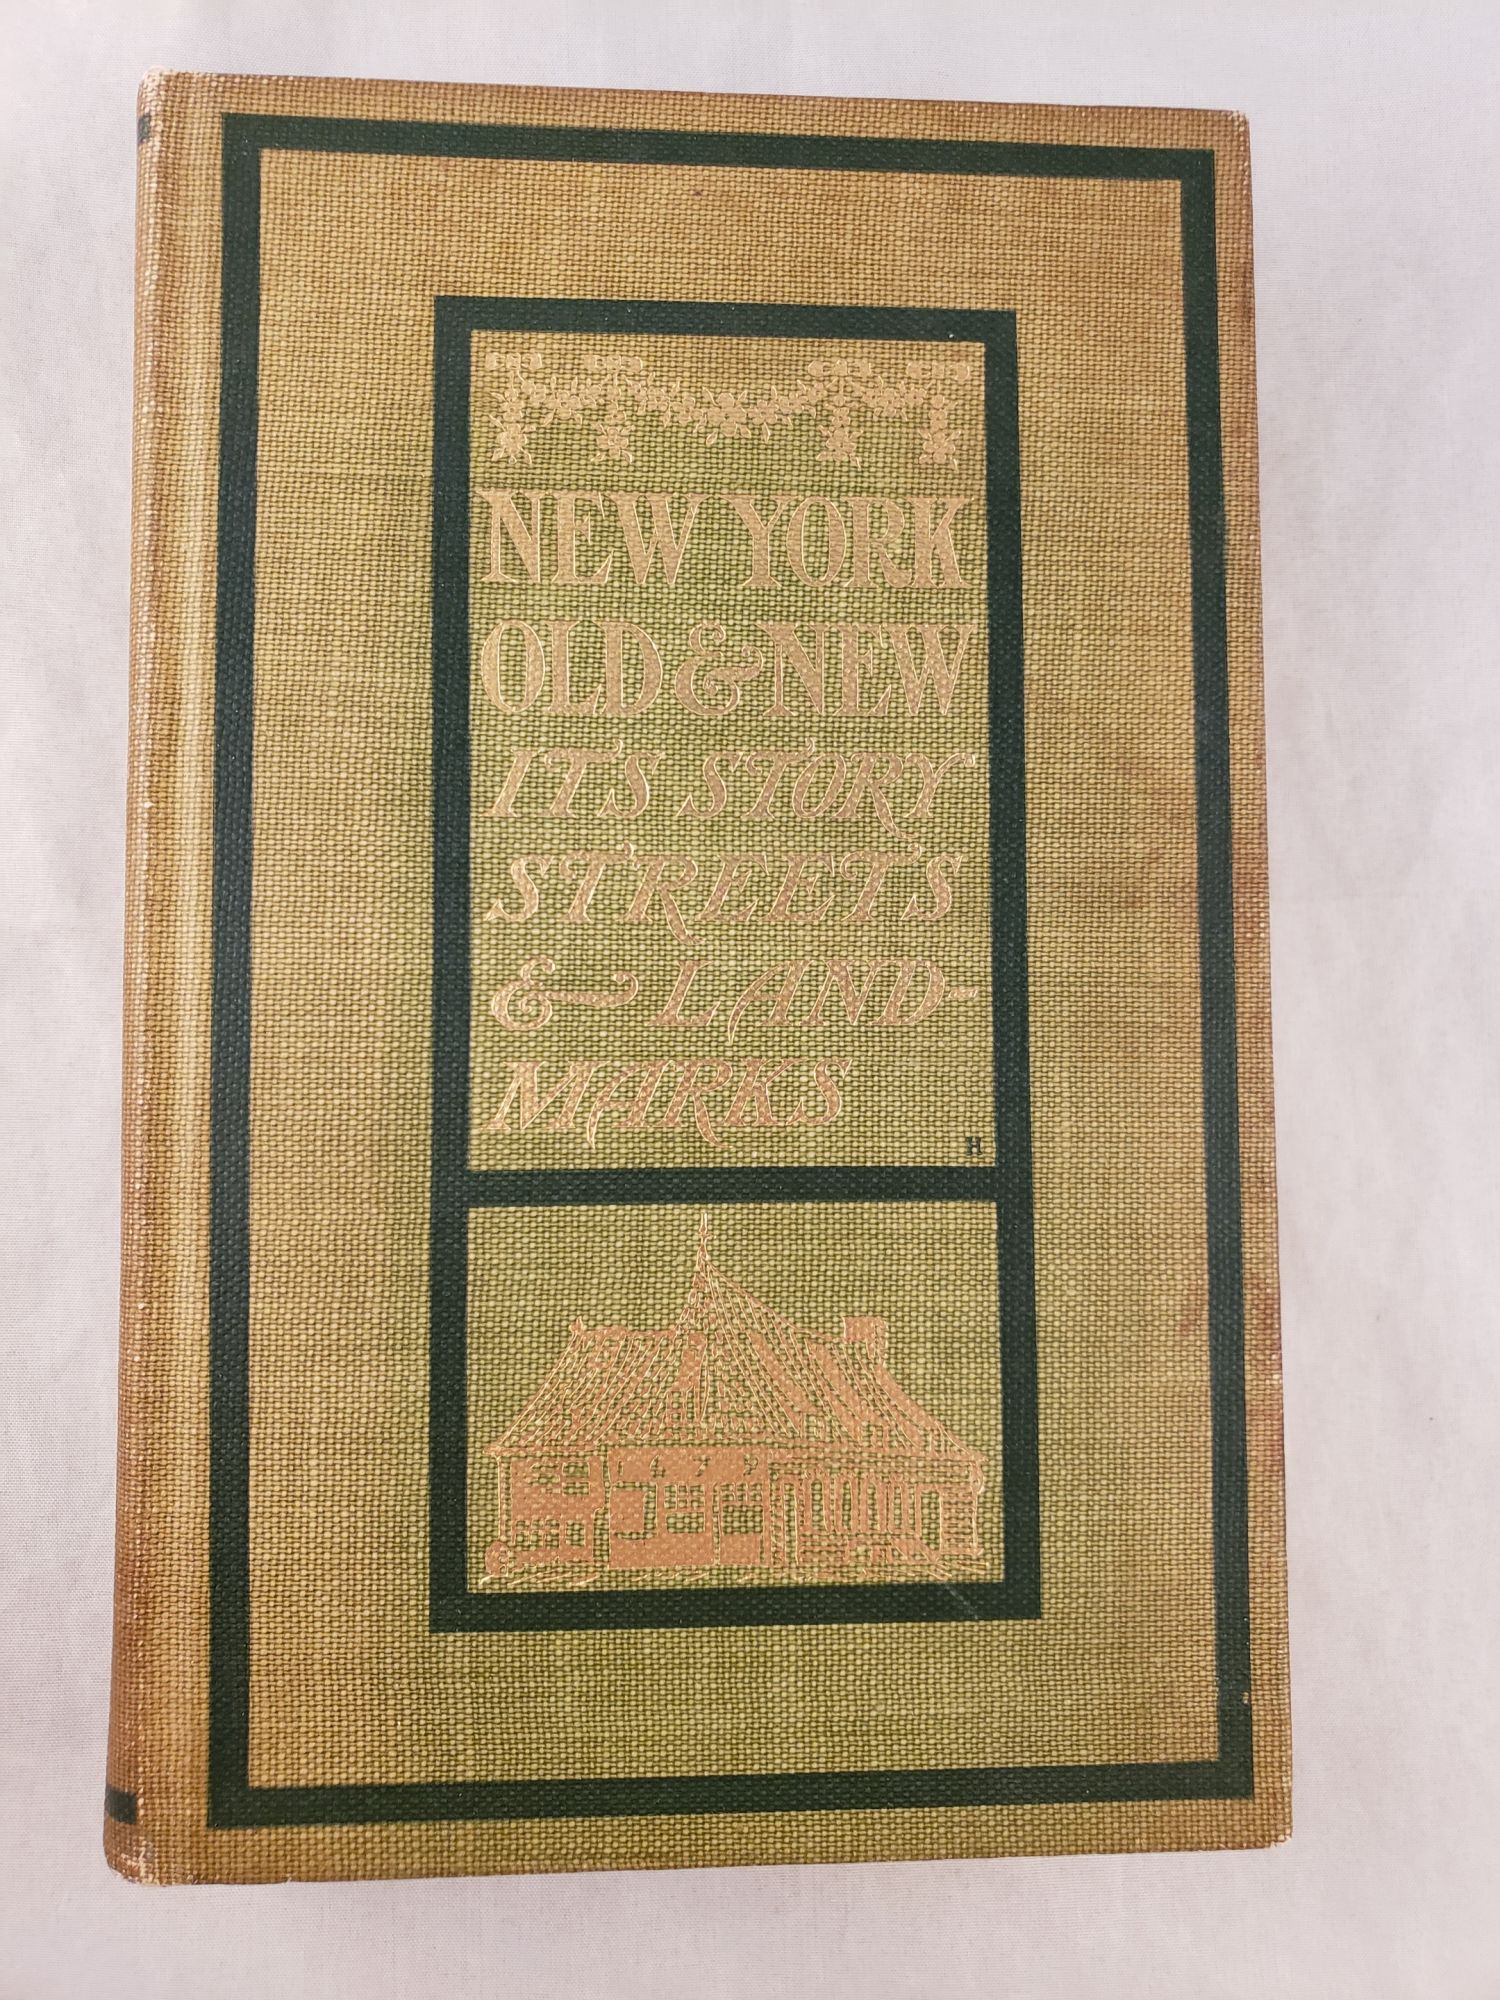 New York Old & New Its Story, Streets, and Landmarks, Volume Two - Wilson, Rufus Rockwell